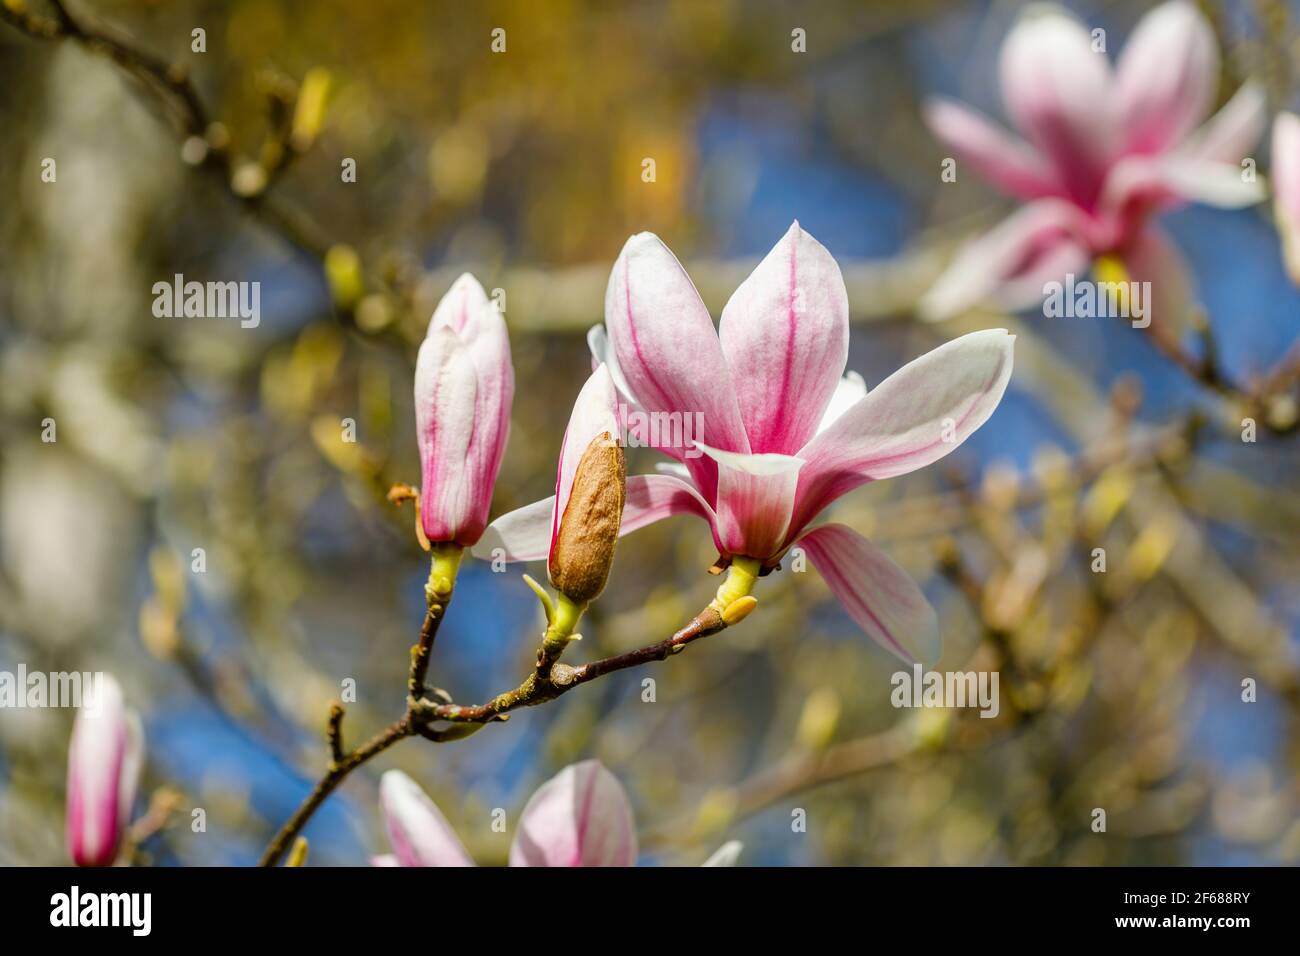 Flowers of a pink tinged white magnolia tree growing in a garden in Surrey, south-east England, blooming in spring Stock Photo